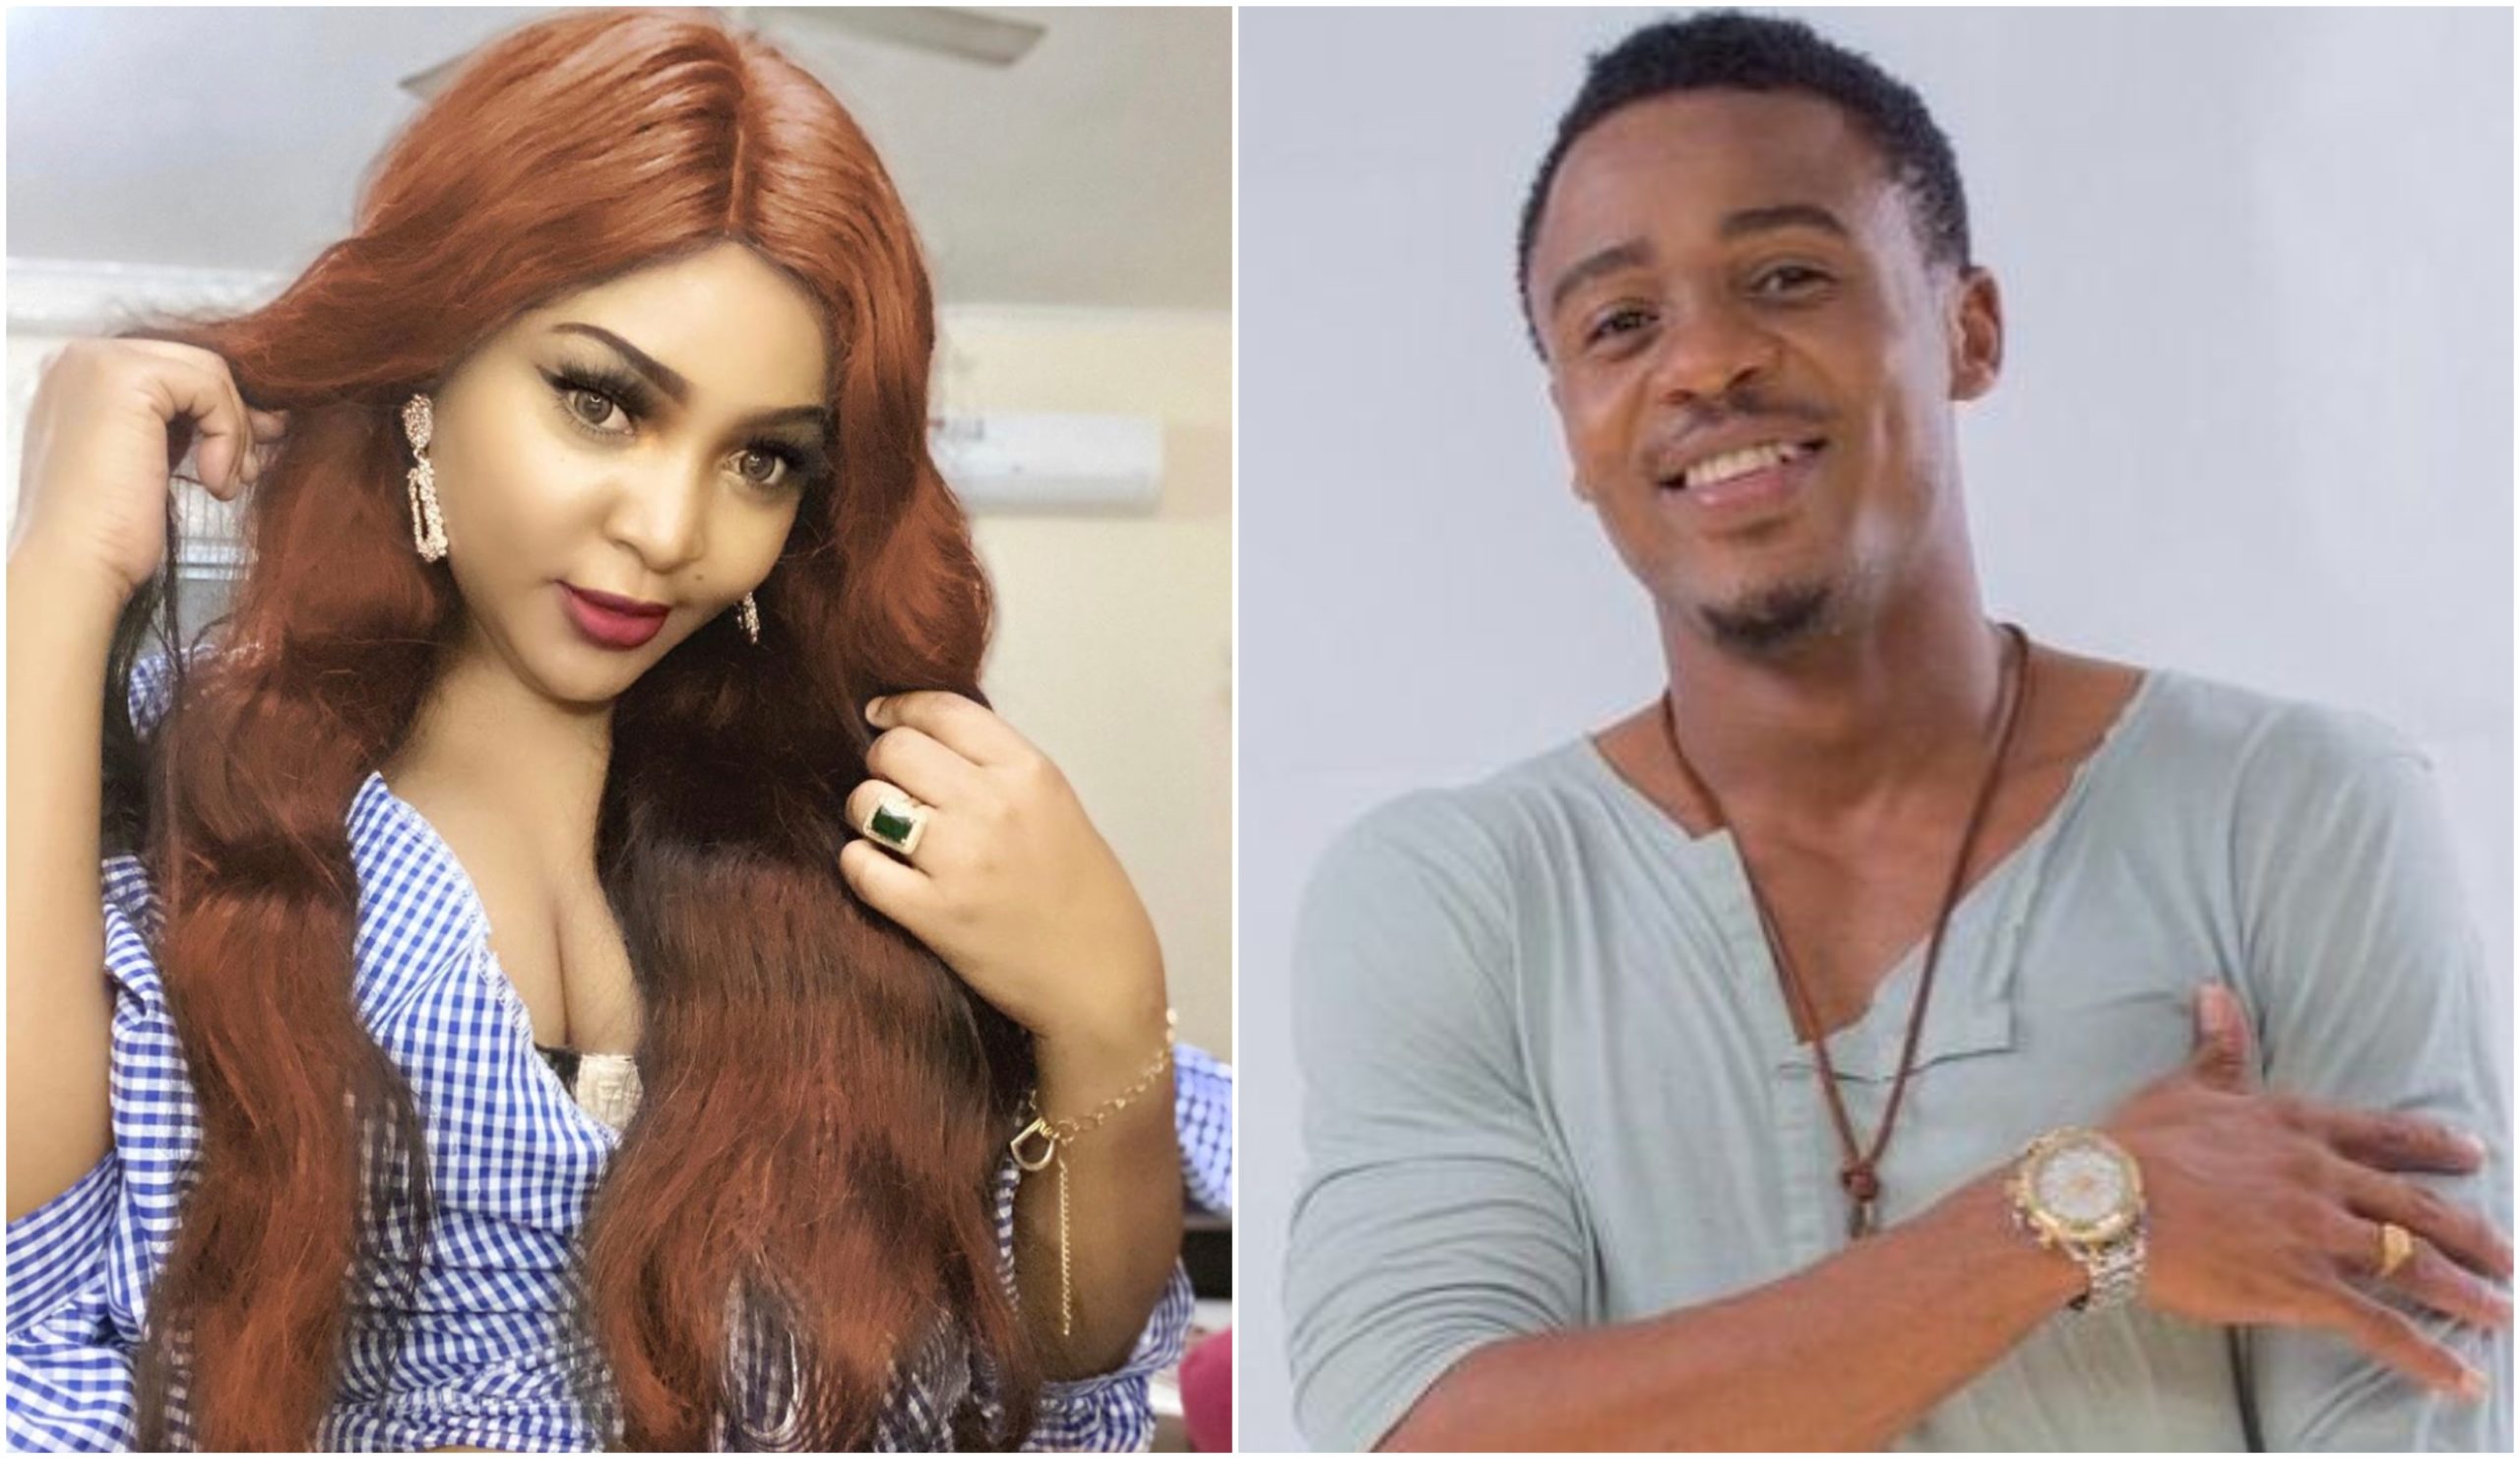 ¨Forget the past!¨ Ali Kiba publicly defends alleged secret affair with Diva The Boss